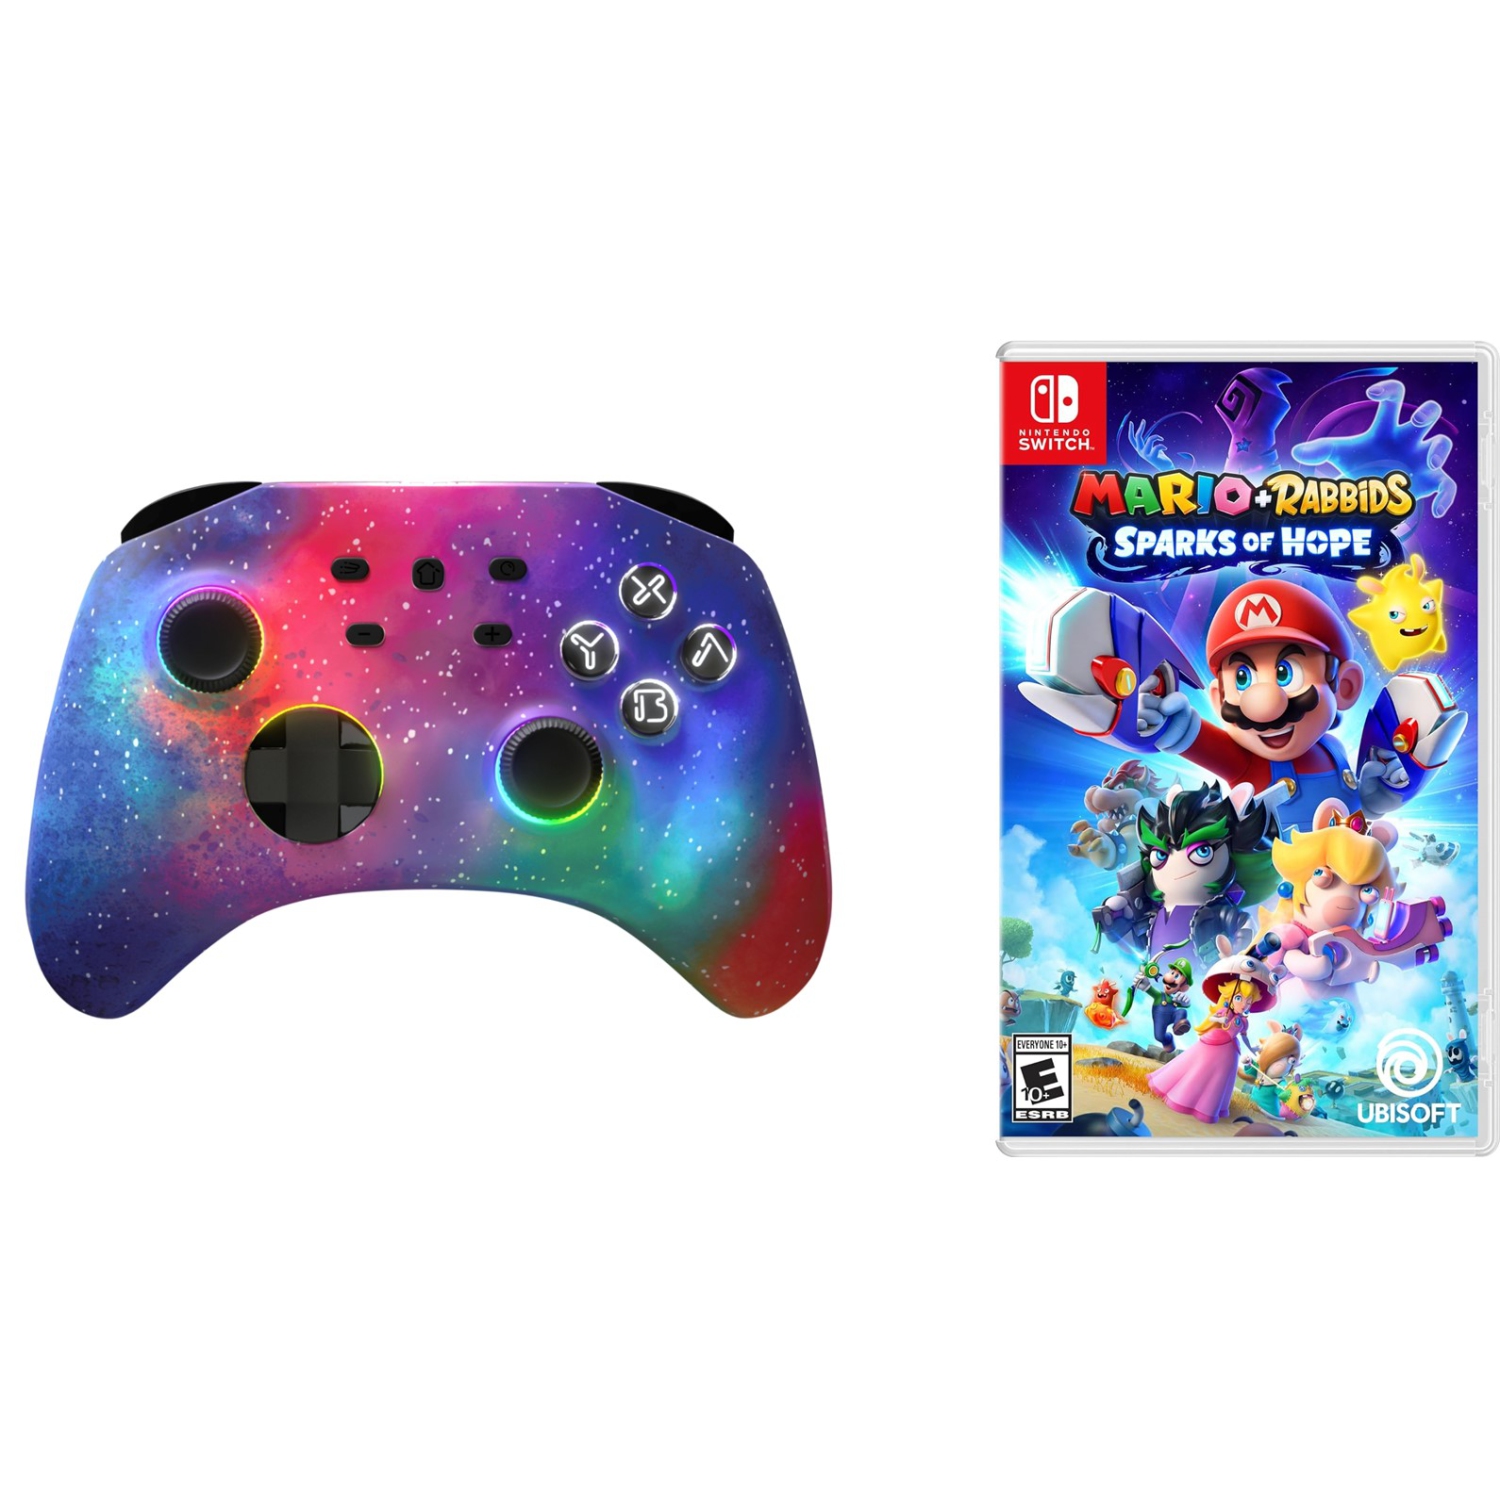 Mario + Rabbids Sparks of Hope Switch with Switch Wireless Controller Surge